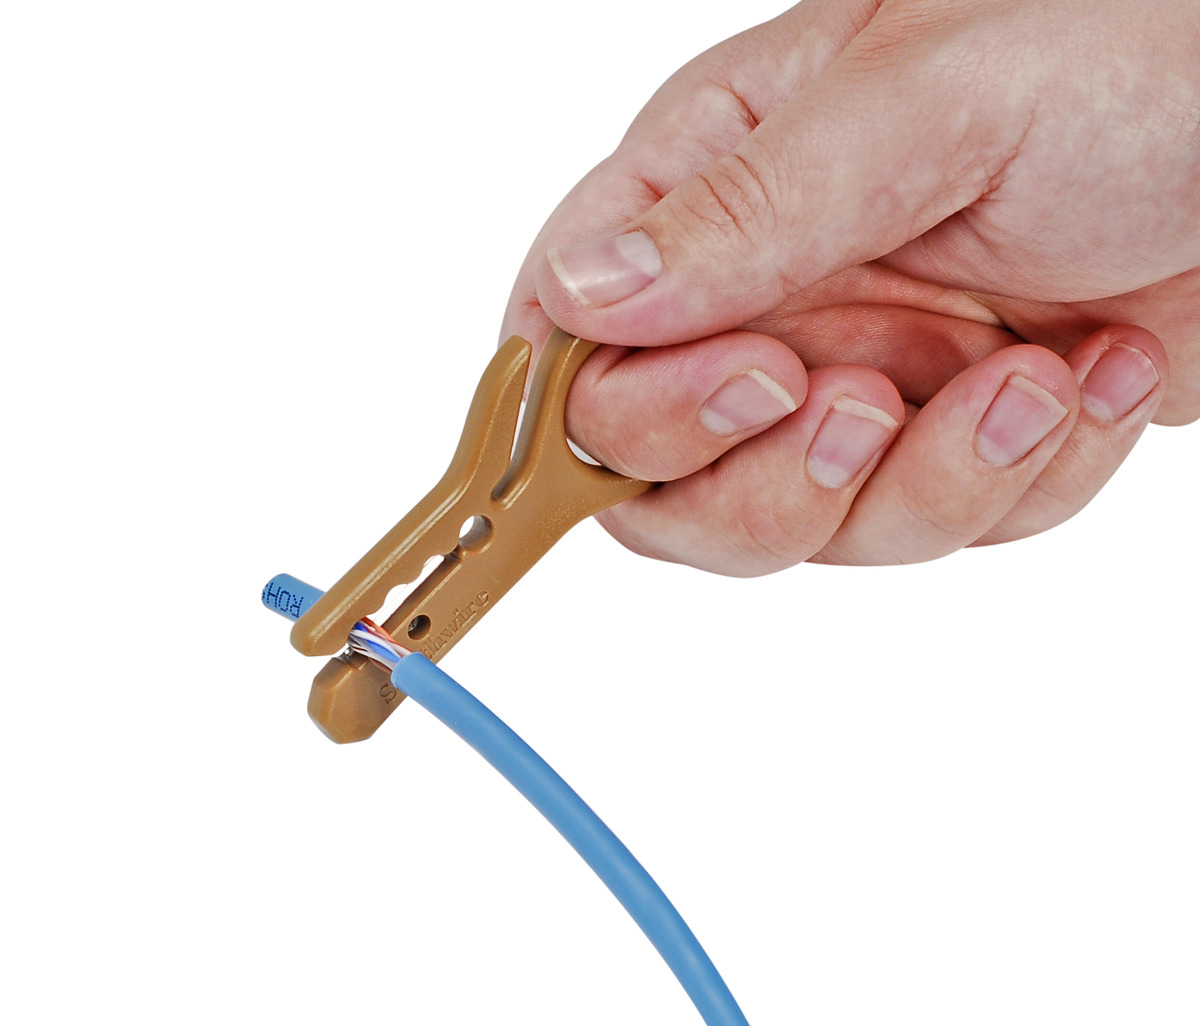 Key Strip Tool for Twisted Pair